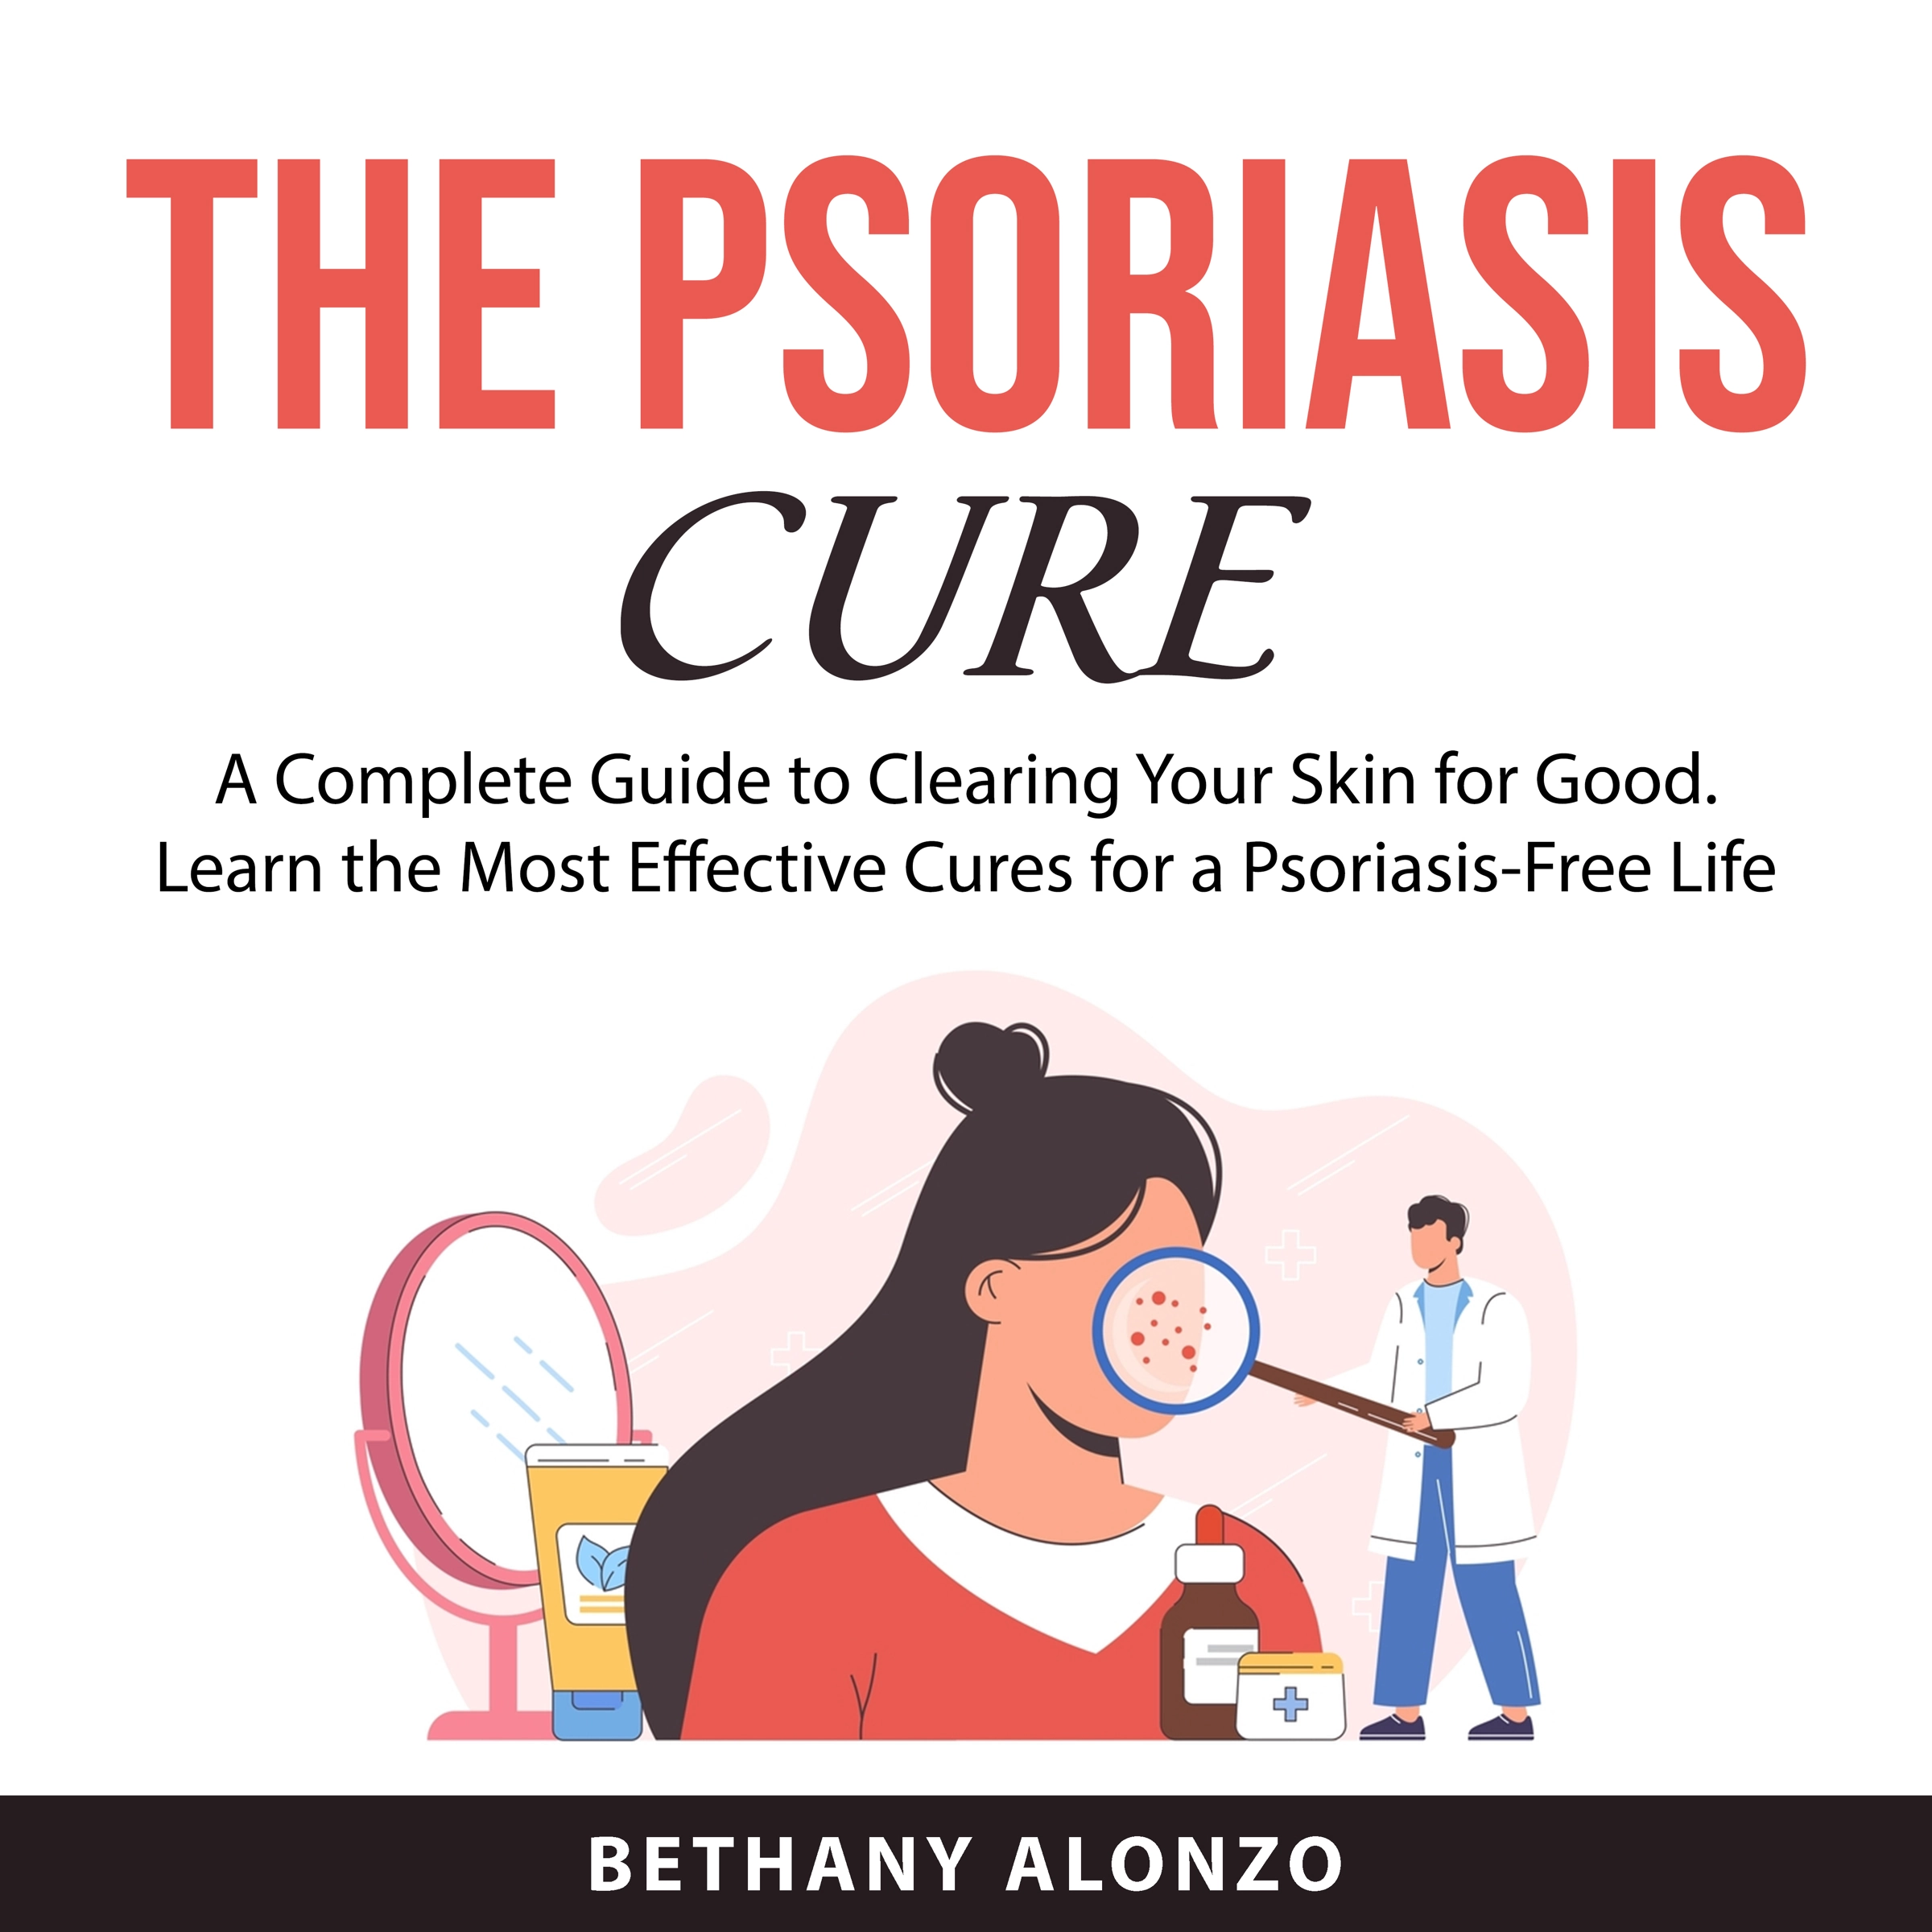 The Psoriasis Cure Audiobook by Bethany Alonzo